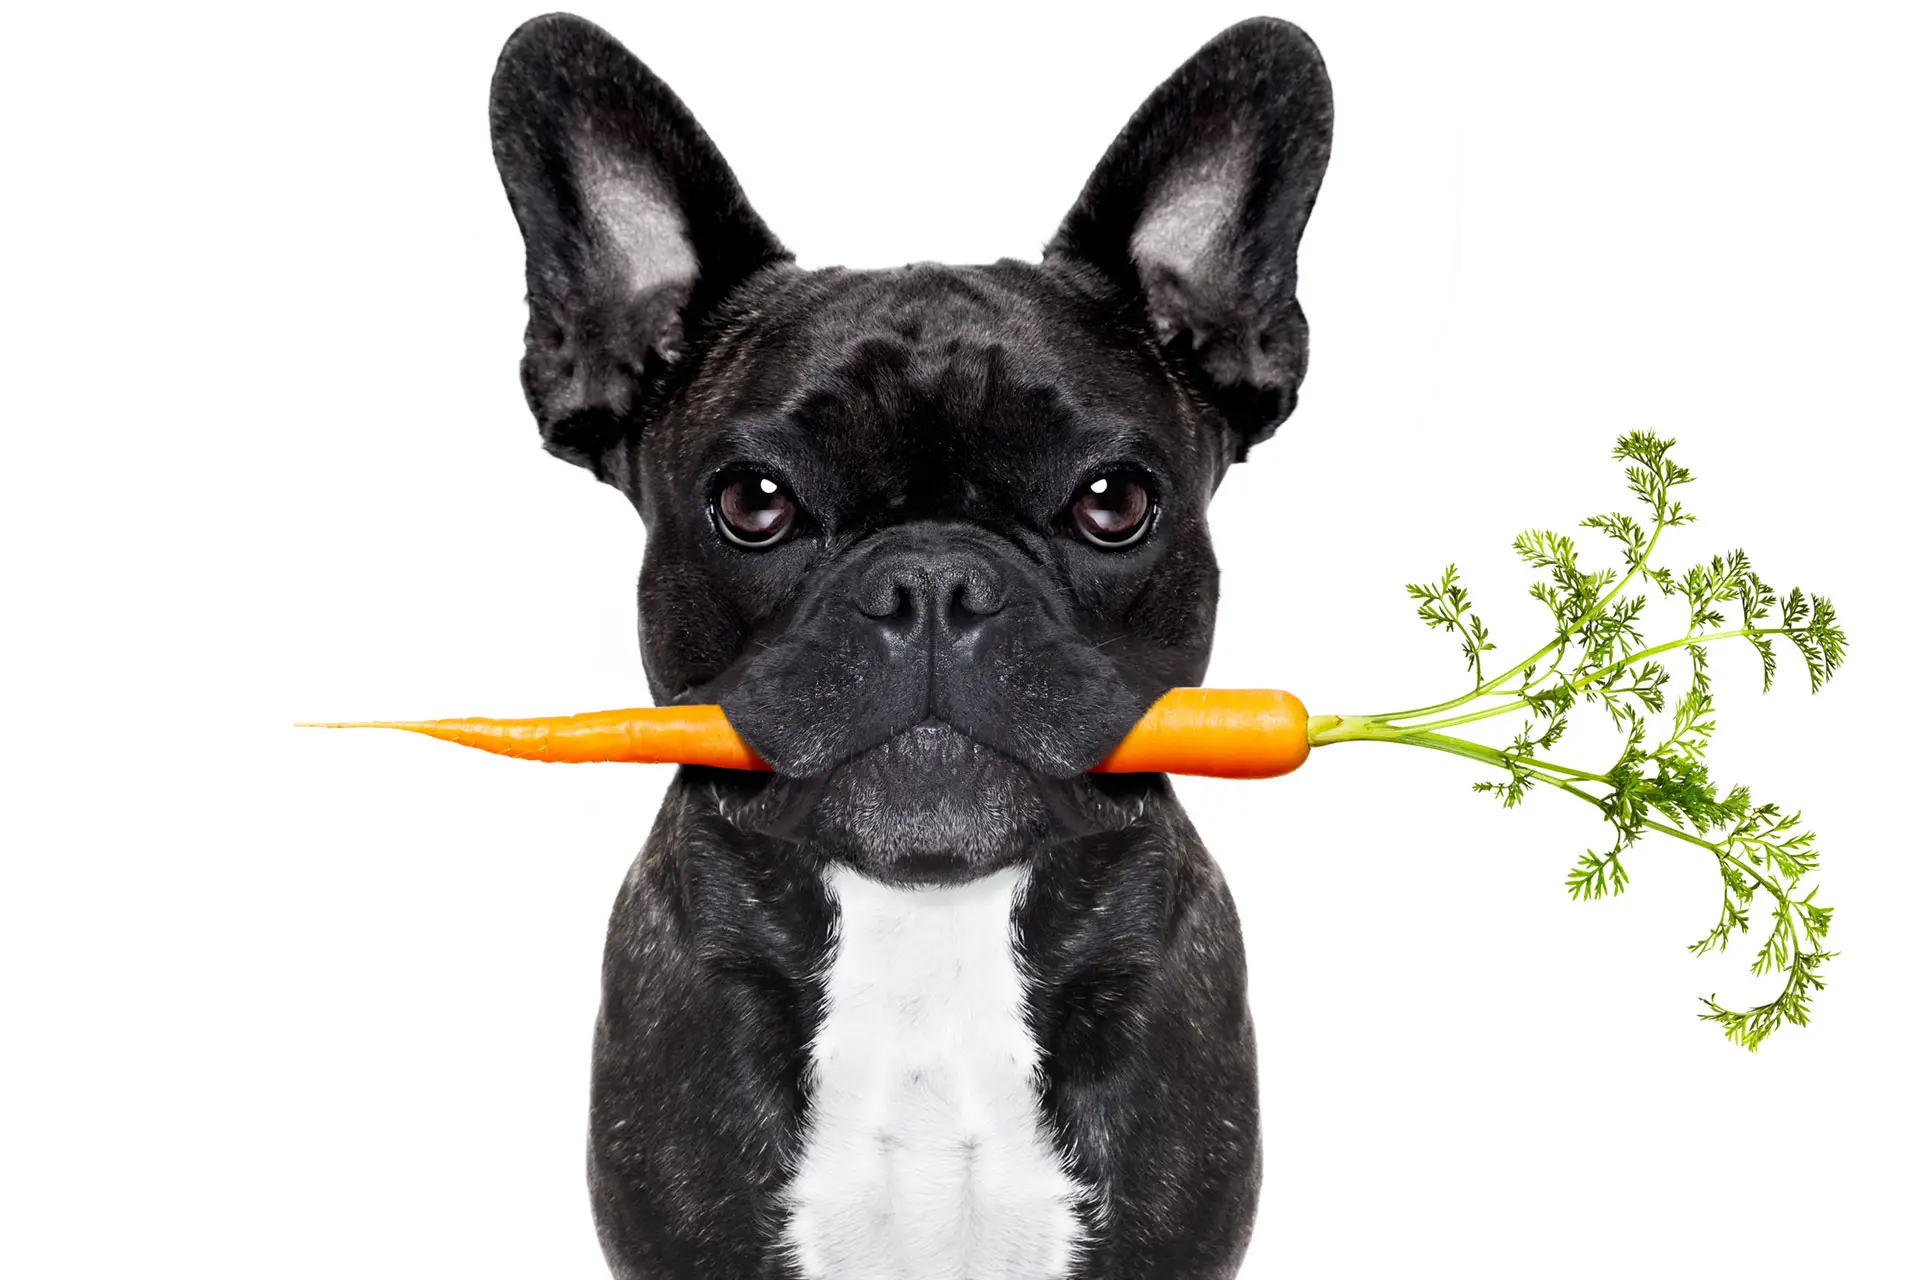 Frenchie Advice and Carrot